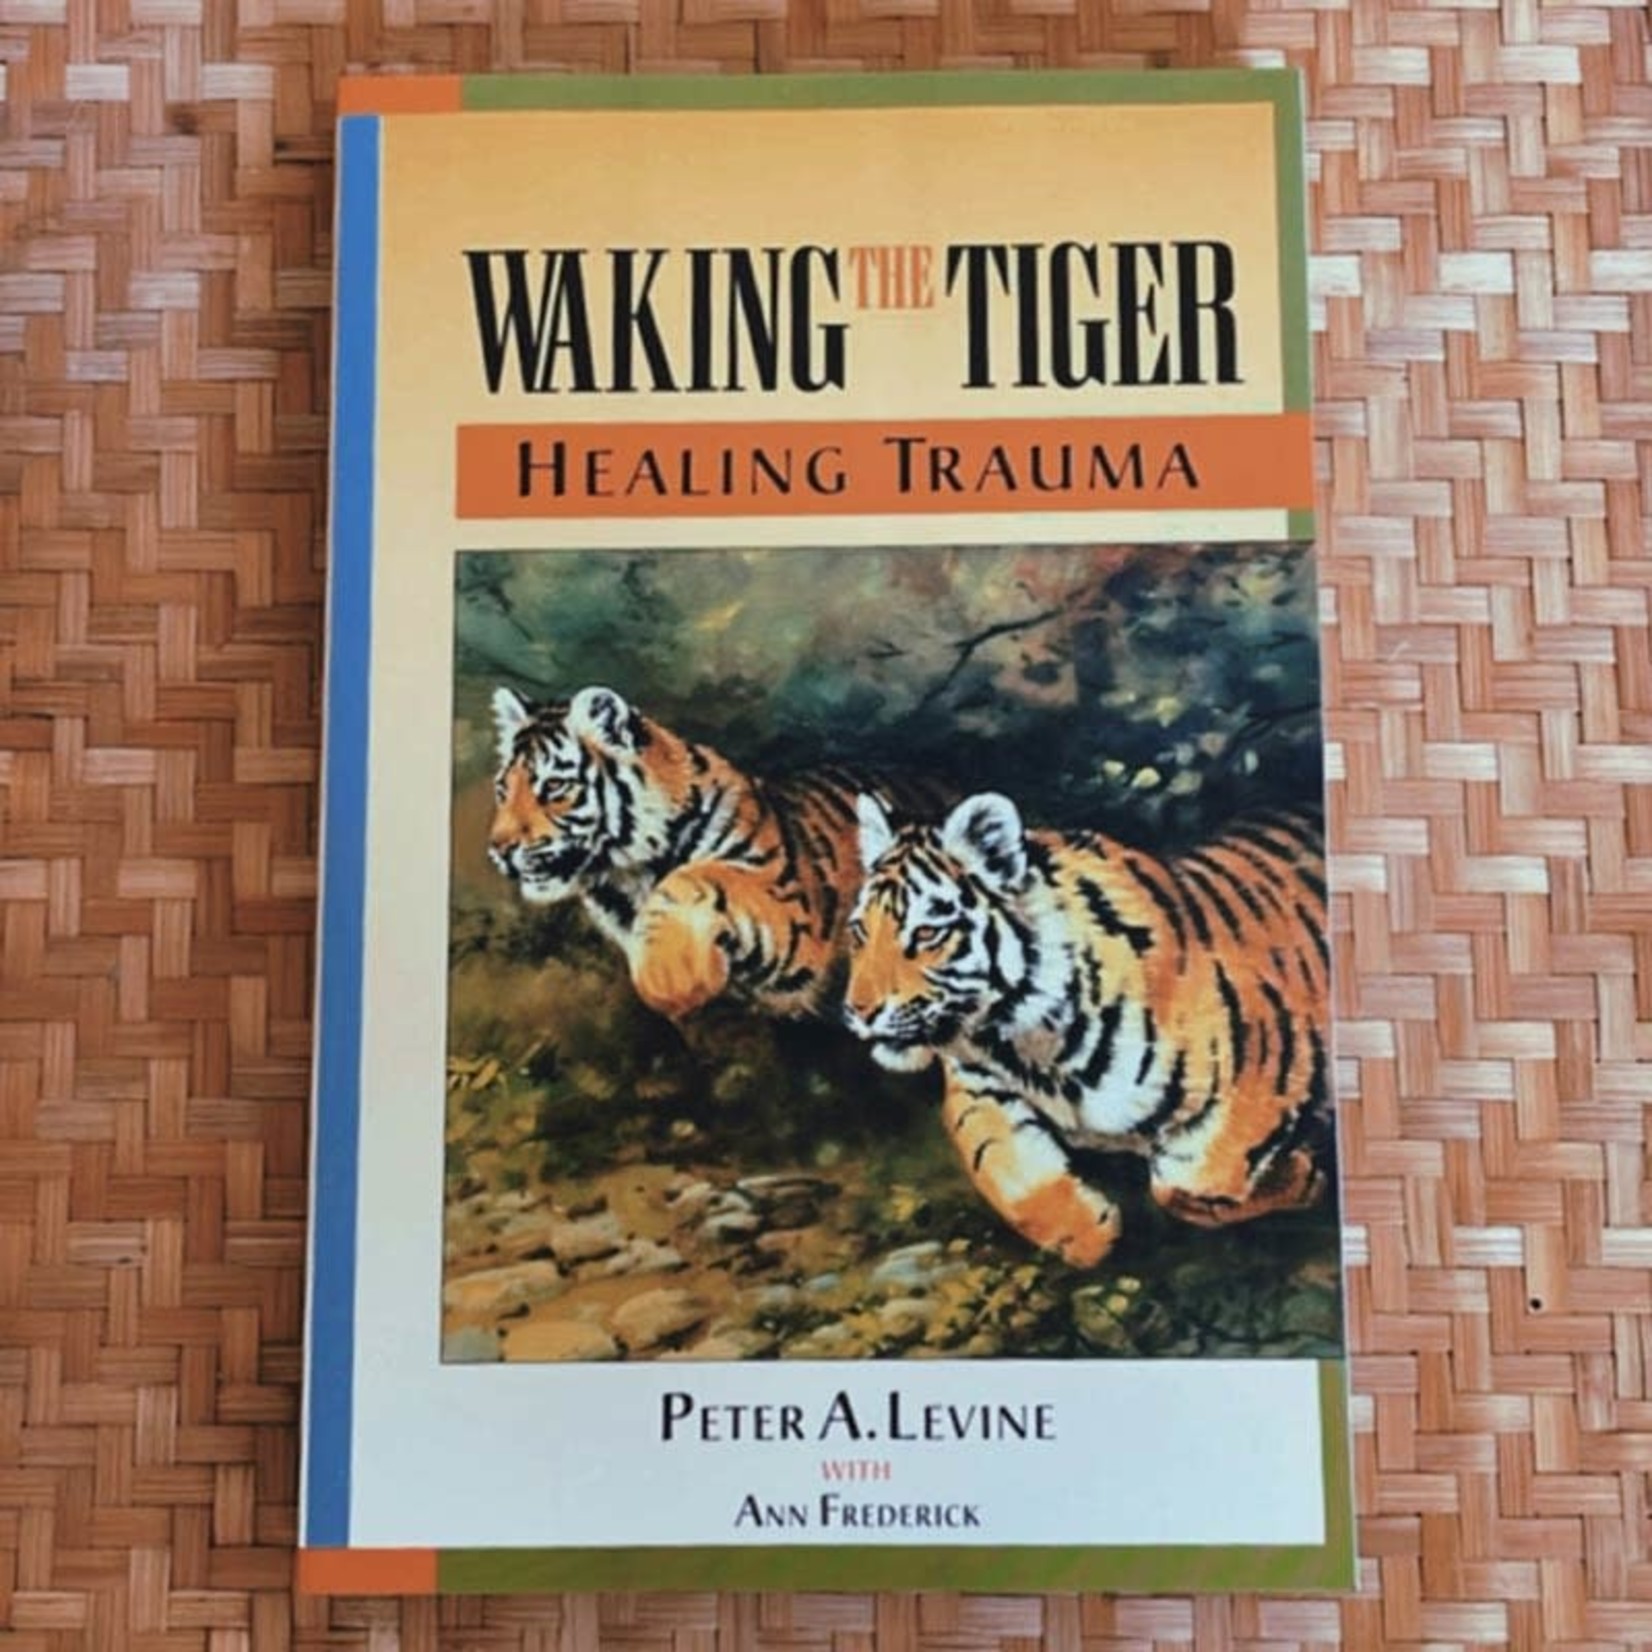 Penguin Books Waking the Tiger : Healing Trauma by Peter A. Levine